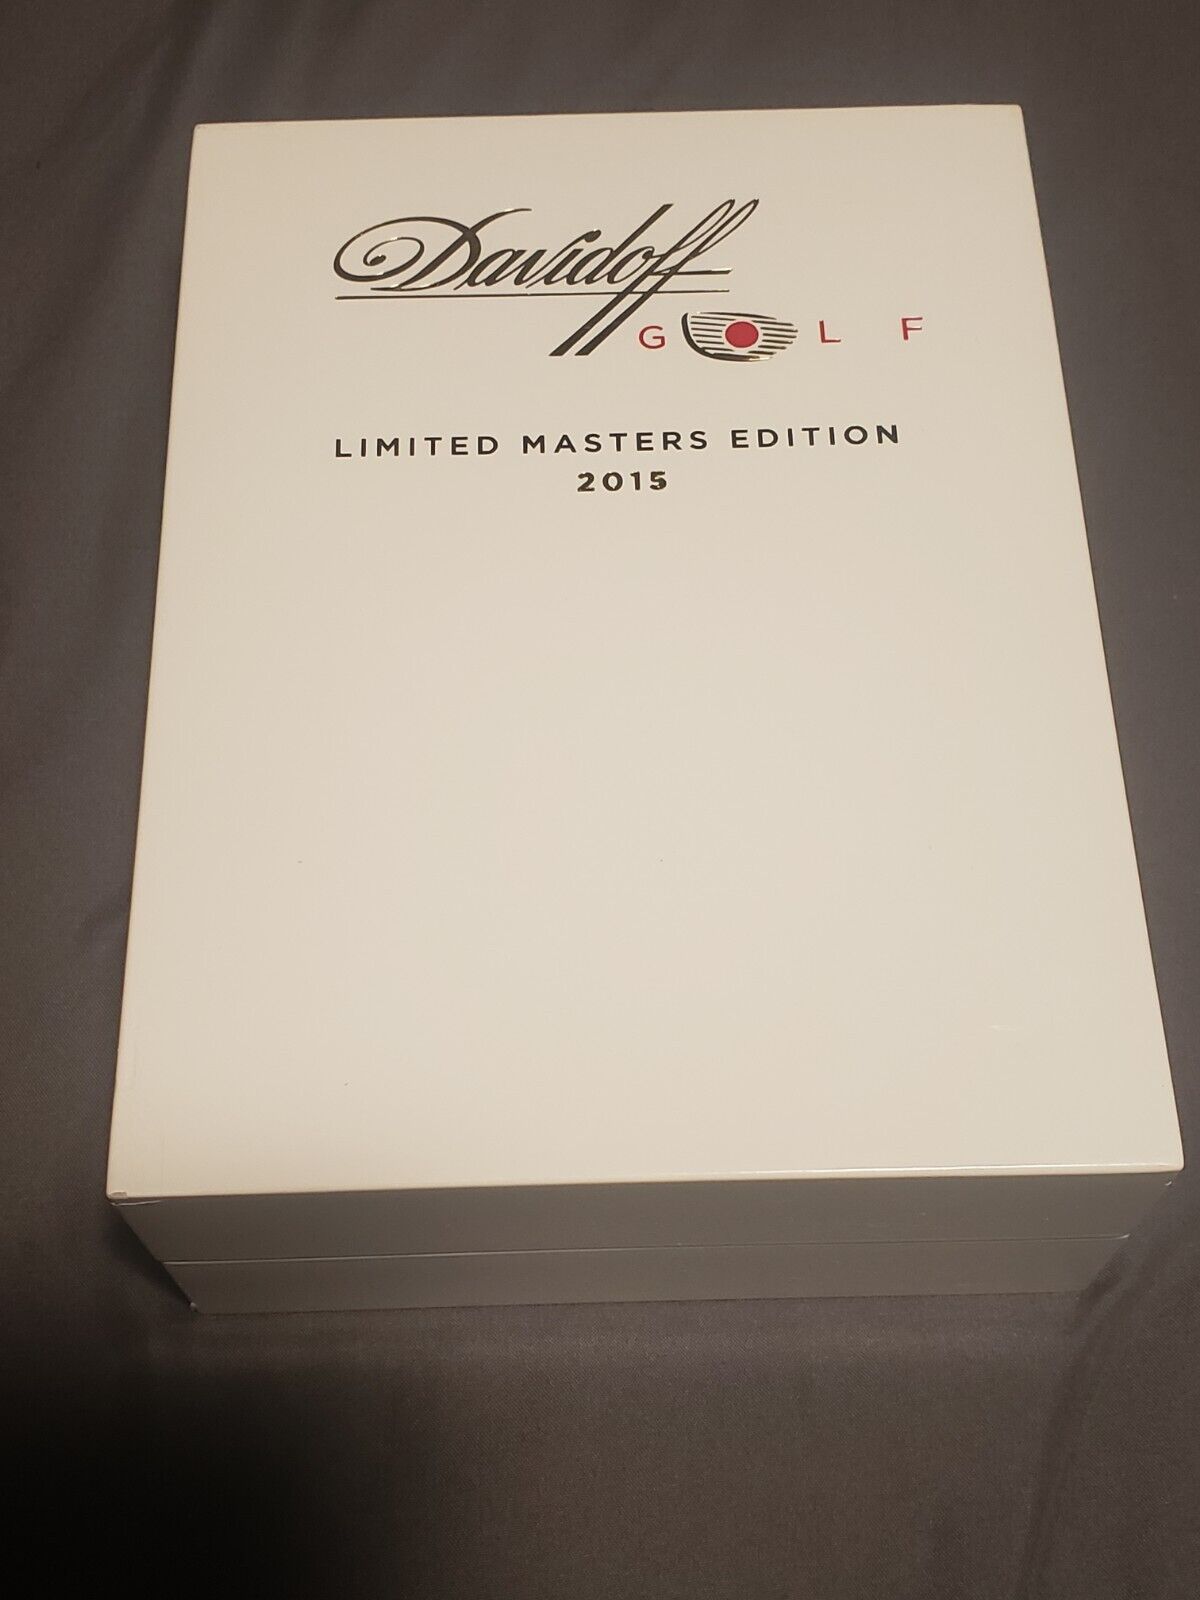 DAVIDOFF Golf Limited Masters Edition ⛳ 2015 Empty Lacquered Cigar Box 